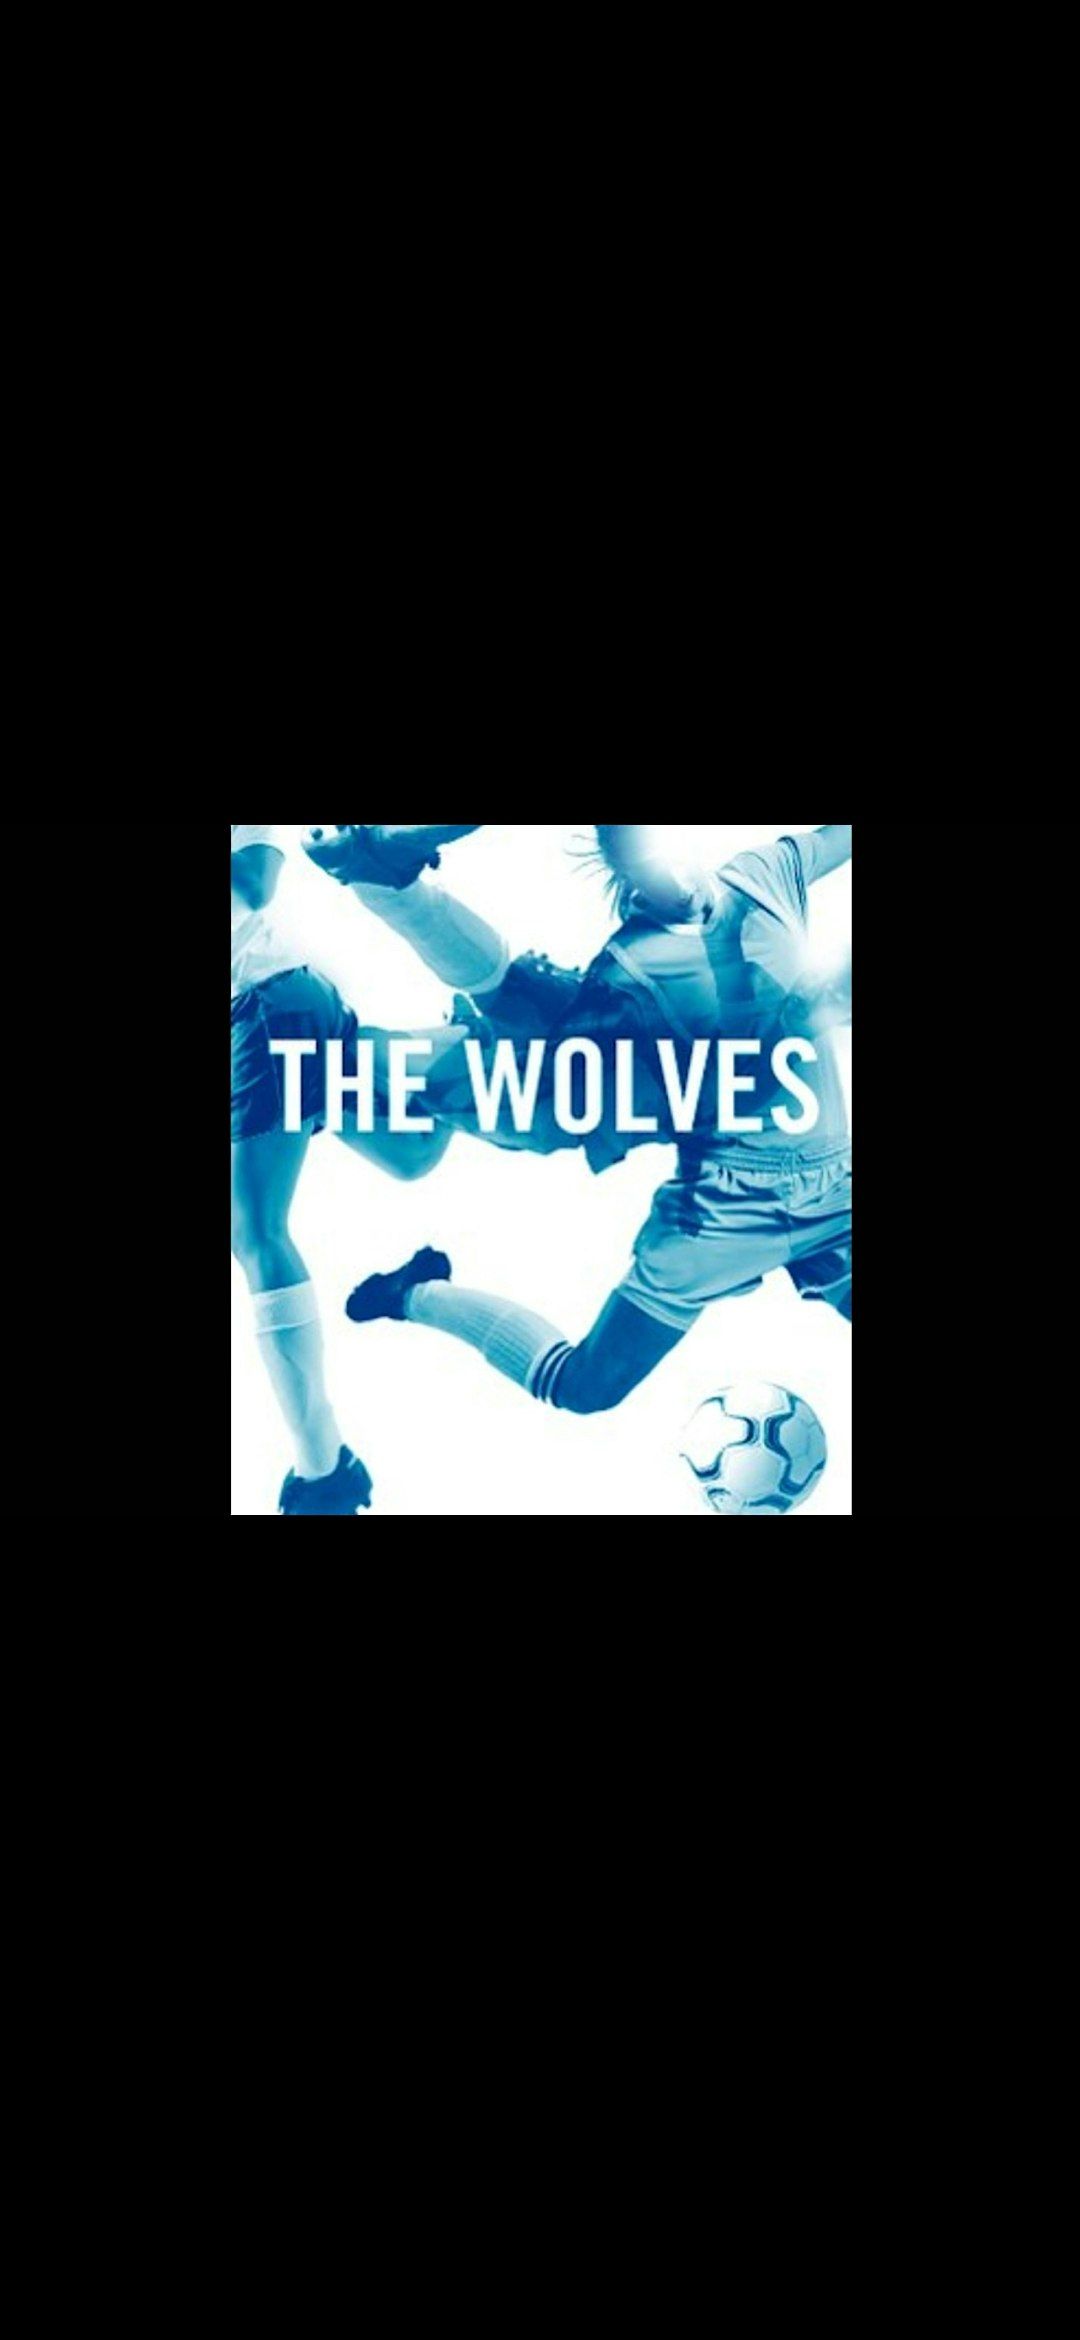 The Wolves Play - Written By Sarah DeLappe (10\/24)